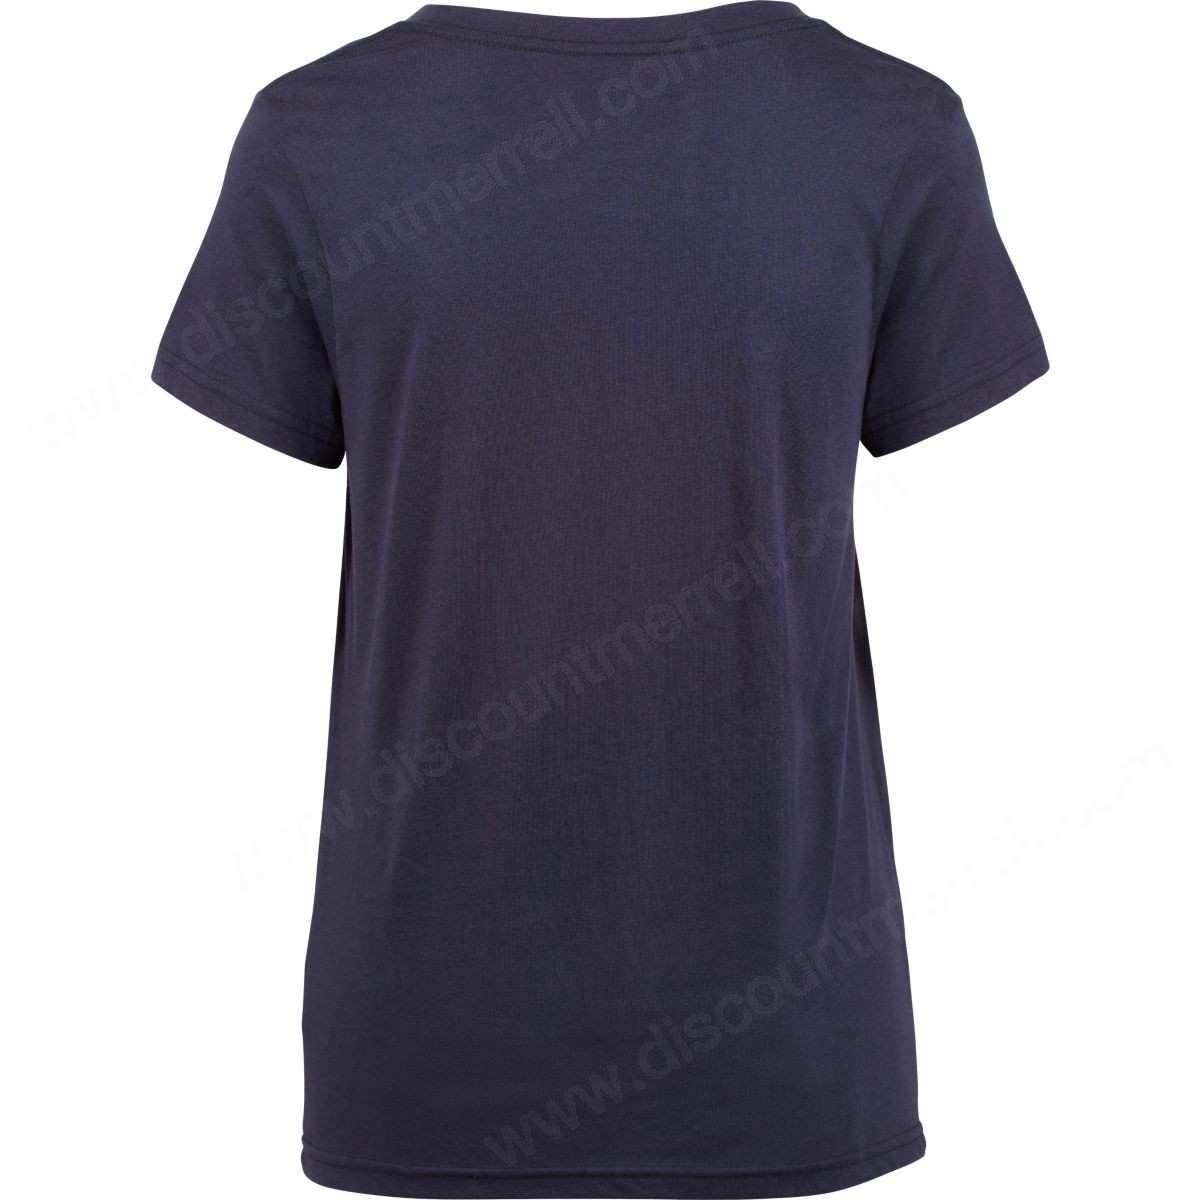 Merrell Lady's Merrell Forest T-Shirts Navy - -1